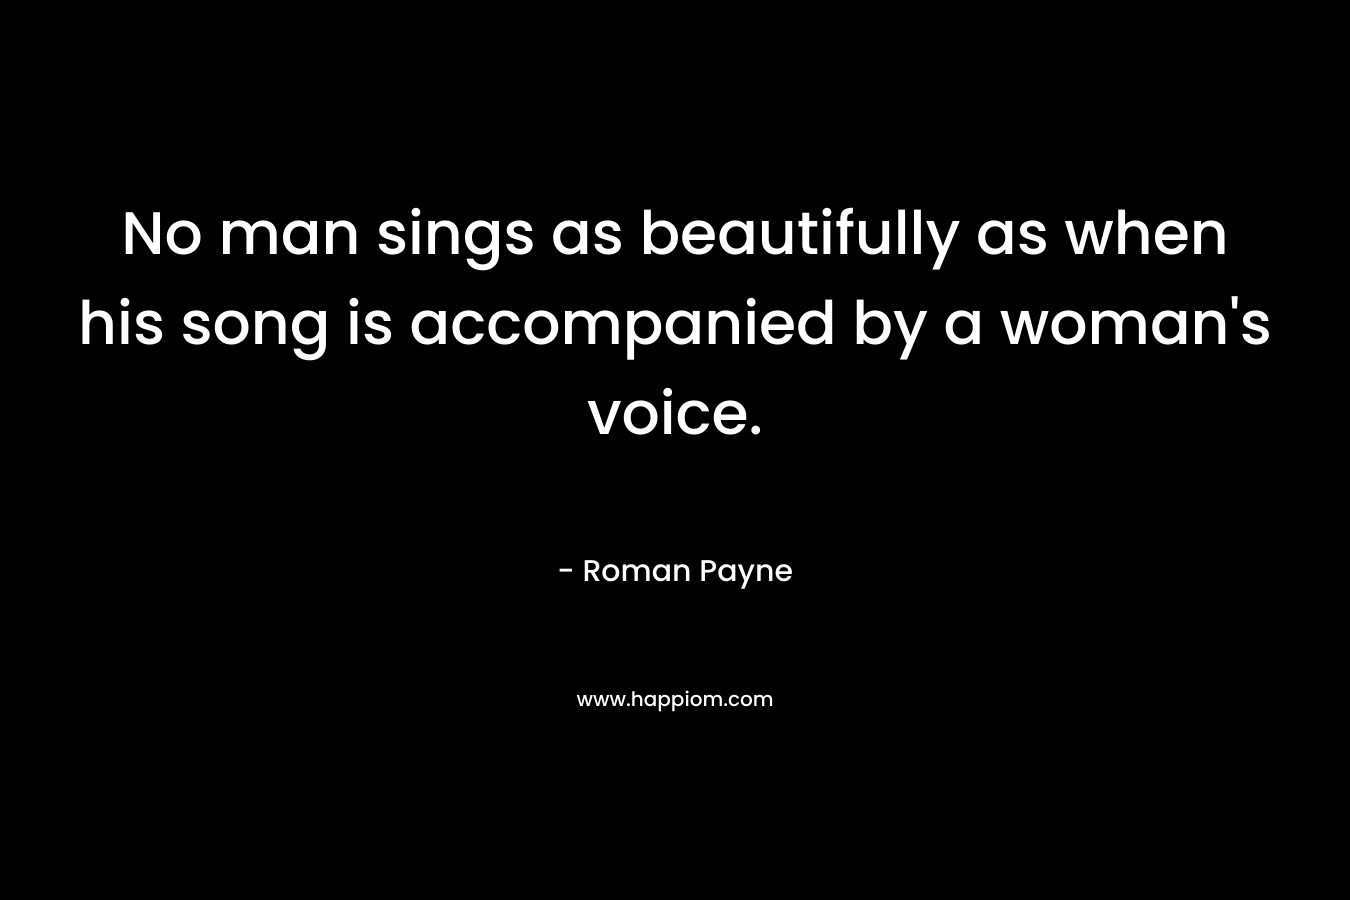 No man sings as beautifully as when his song is accompanied by a woman’s voice. – Roman Payne